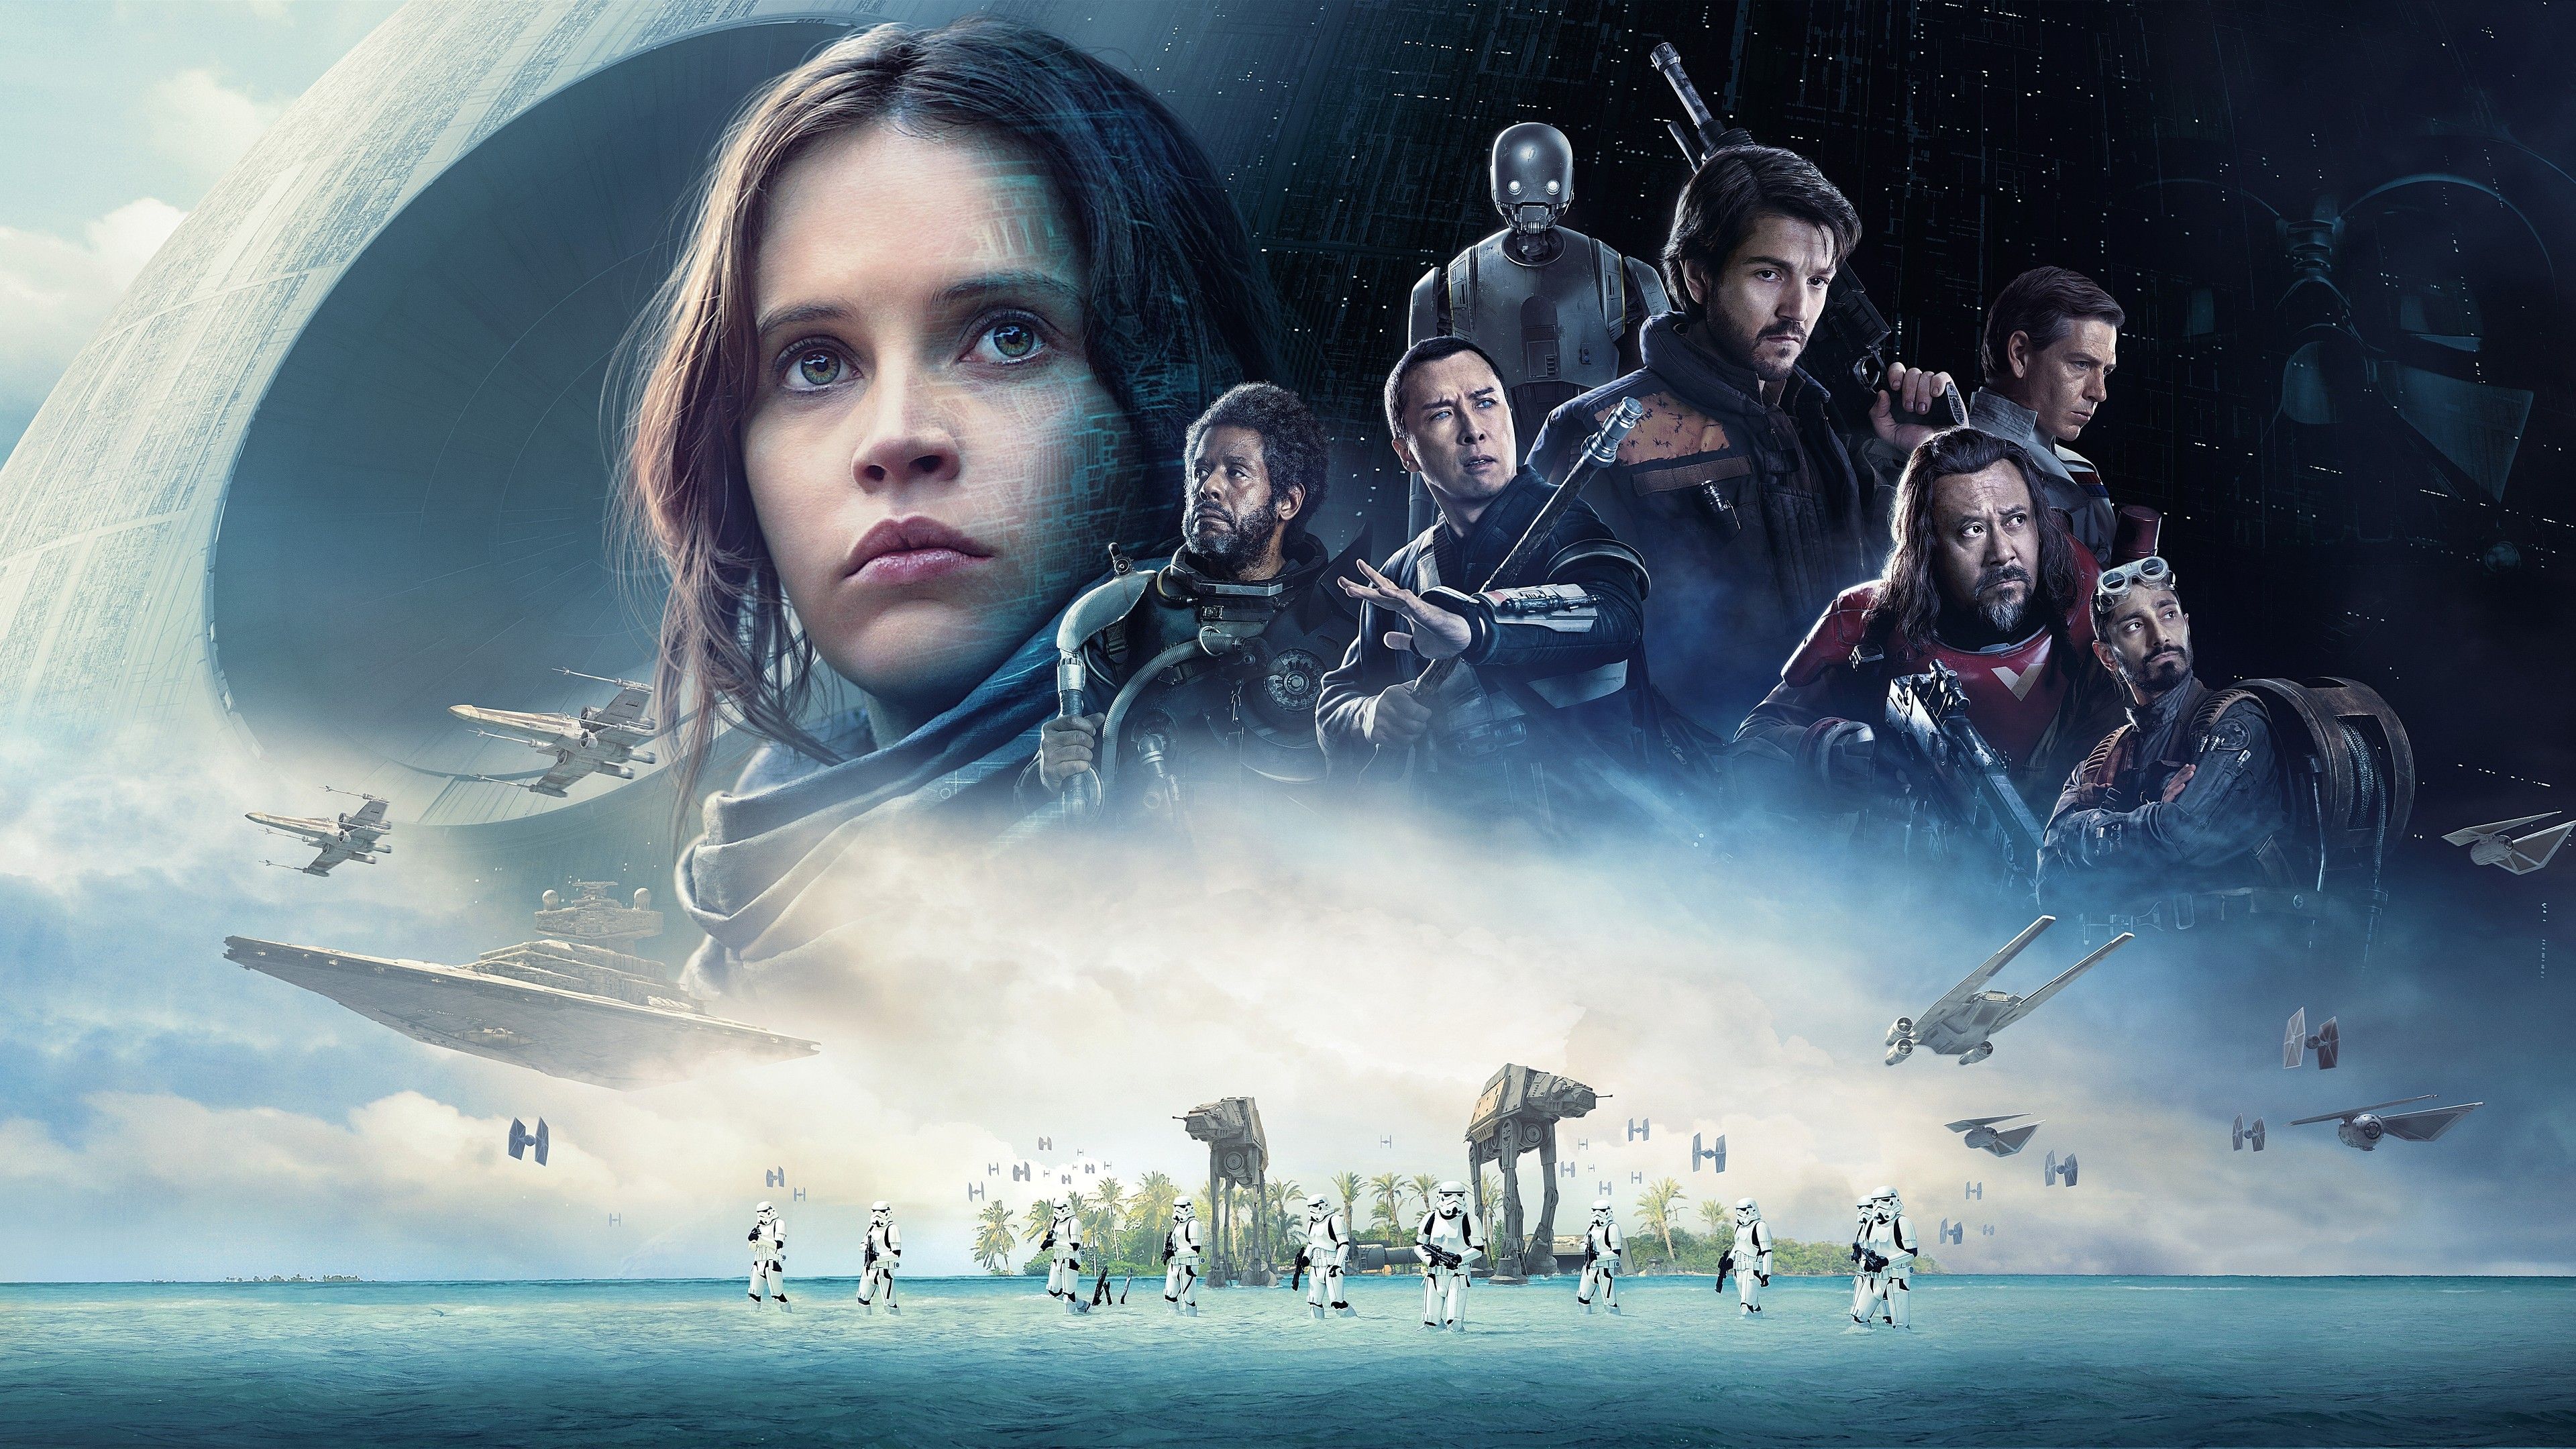 Wallpaper Rogue One: A Star Wars Story, Poster, HD, Movies / Most Popular,. Wallpaper for iPhone, Android, Mobile and Desktop